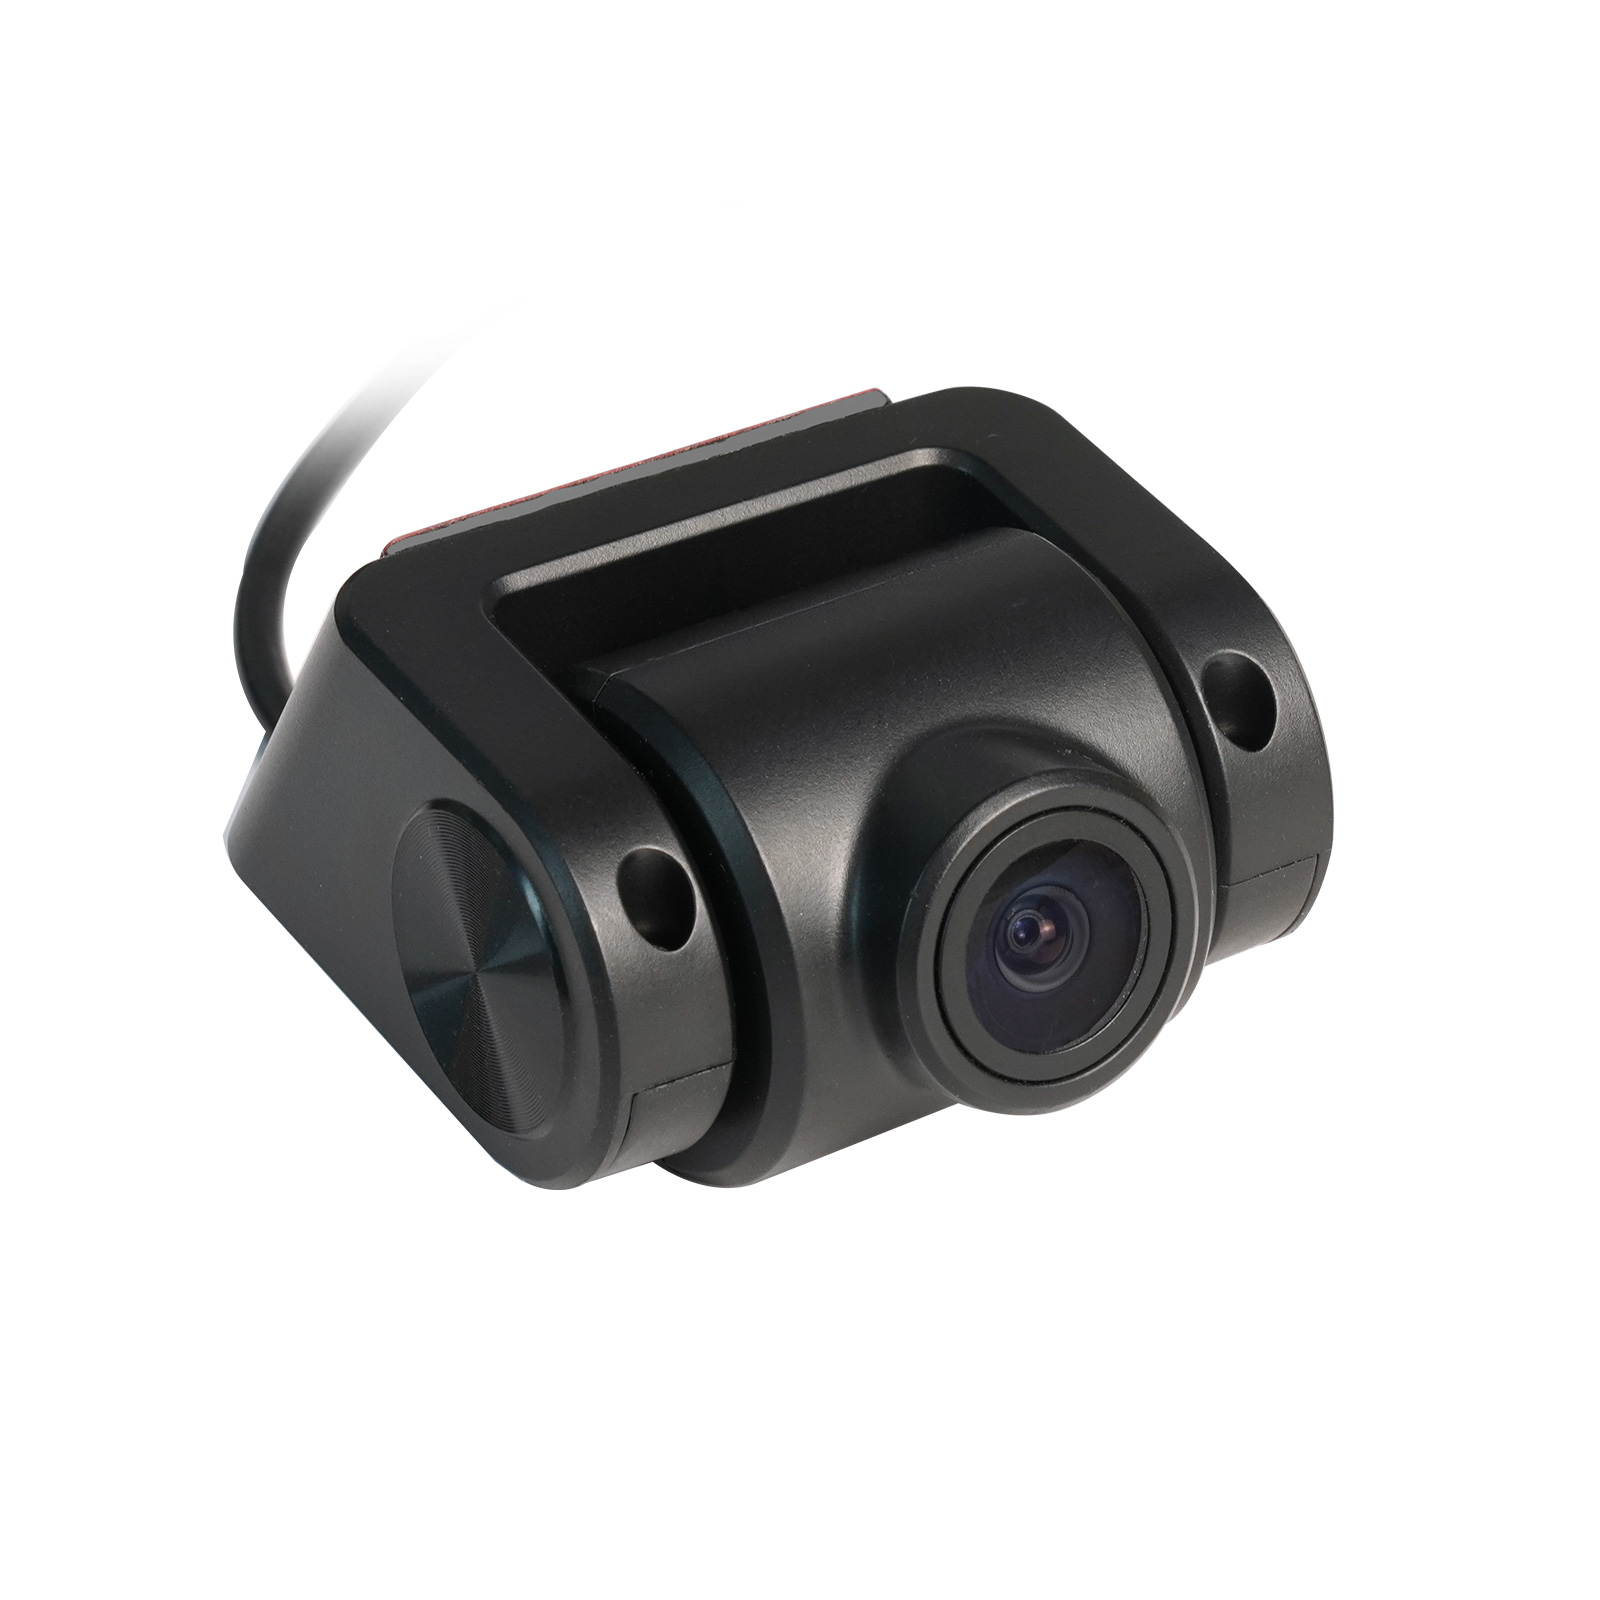 ATOTO AC-FCR01W HD 1080P Front Camera, 150° Wide Viewing Angle